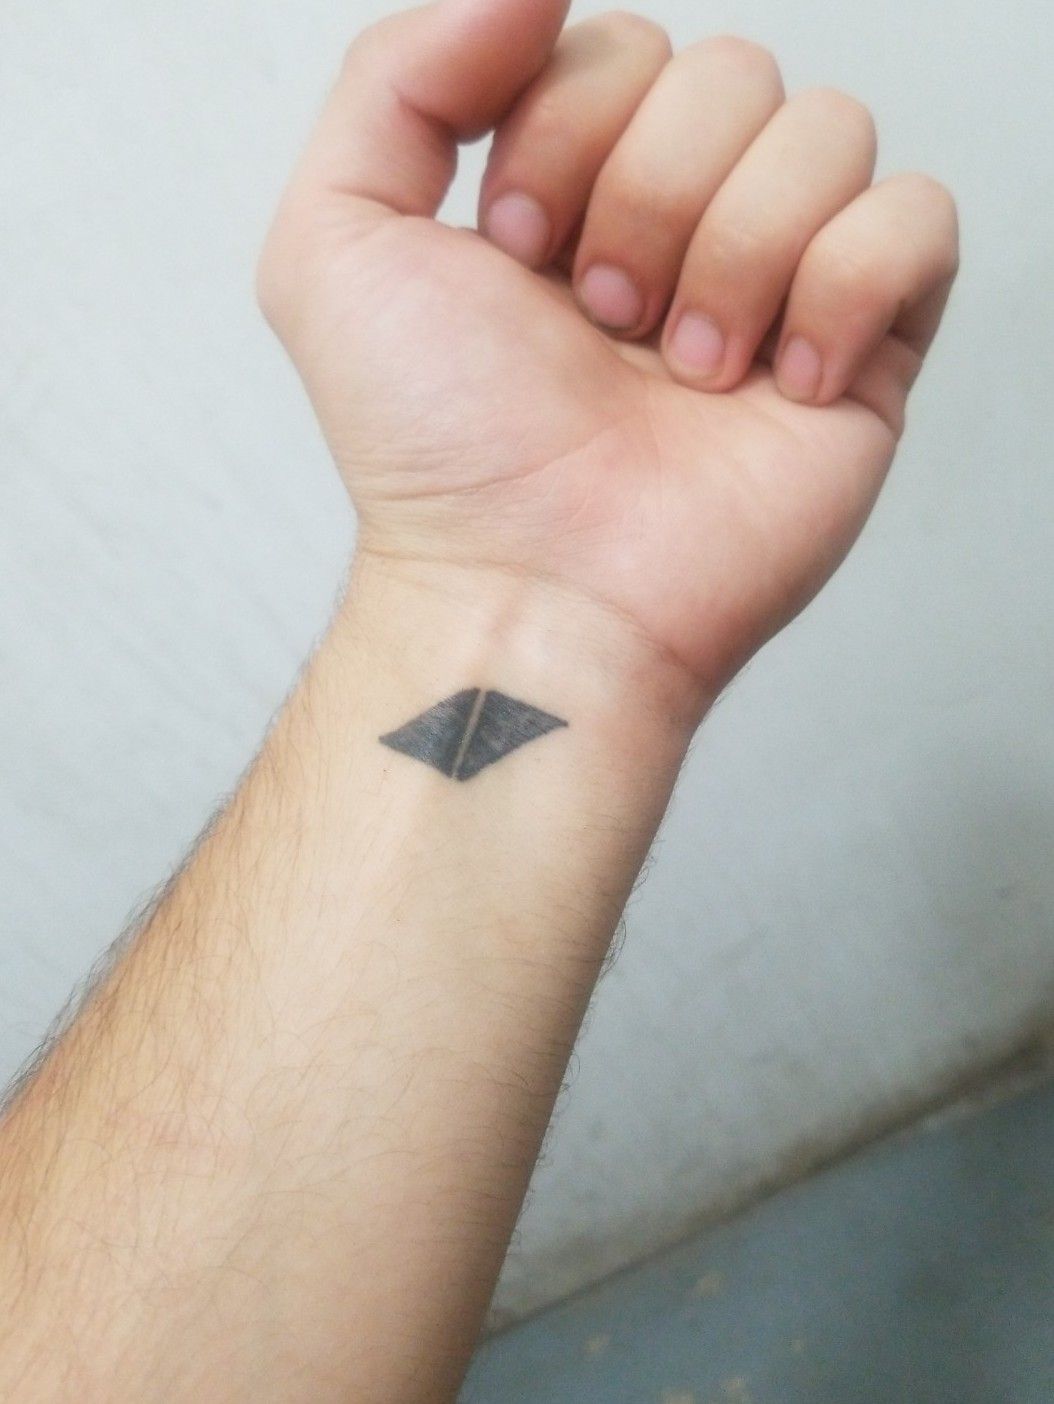 exactly three months later i got an avicii tattoo looks almost the same  with kygos also my first tat ever  ravicii